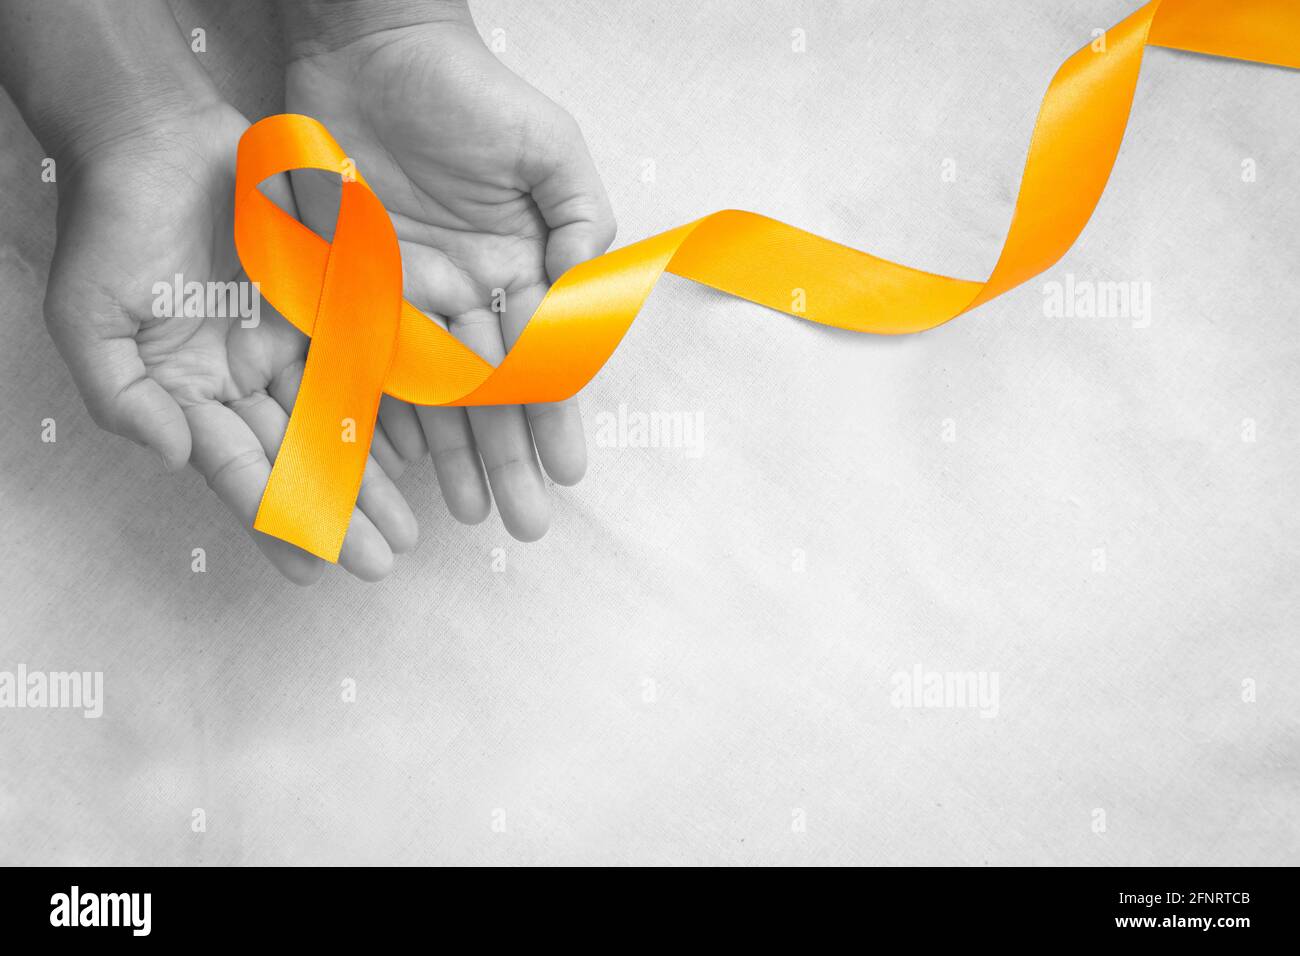 Hands holding orange color ribbon on white fabric with copy space. Kidney Cancer Awareness, Leukemia disease, Skin cancer awareness, World Cancer Day. Stock Photo